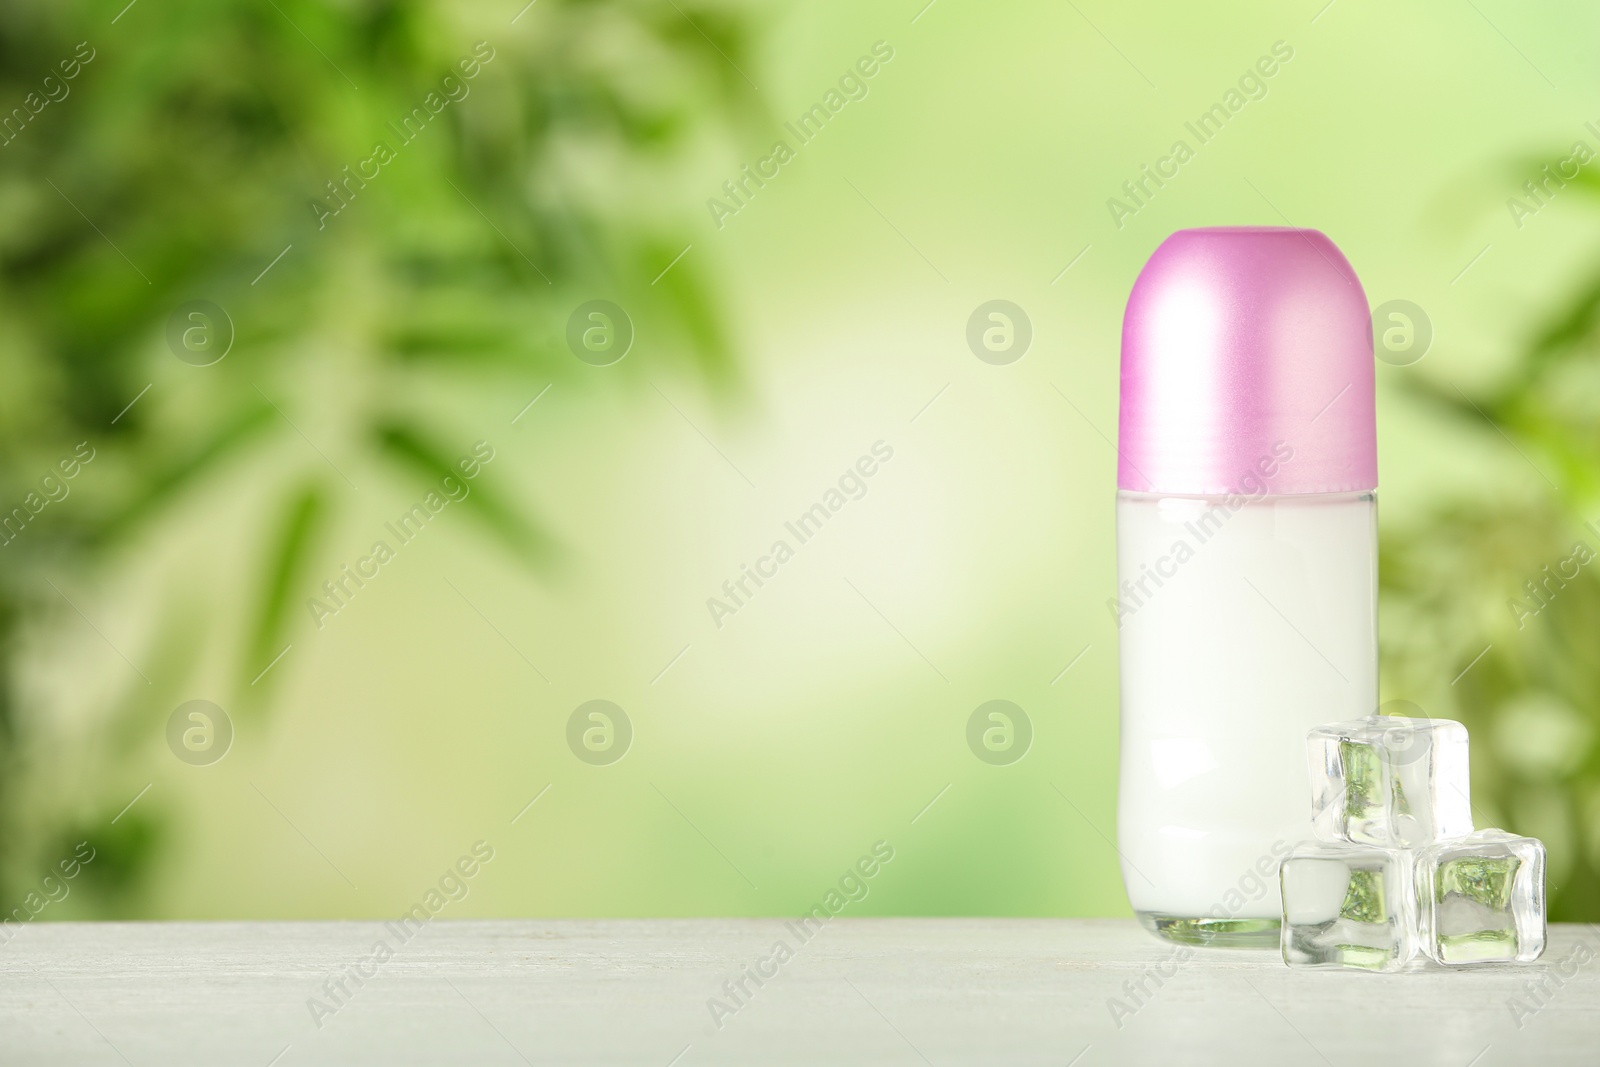 Photo of Deodorant container and ice cubes on white wooden table against blurred background. Space for text